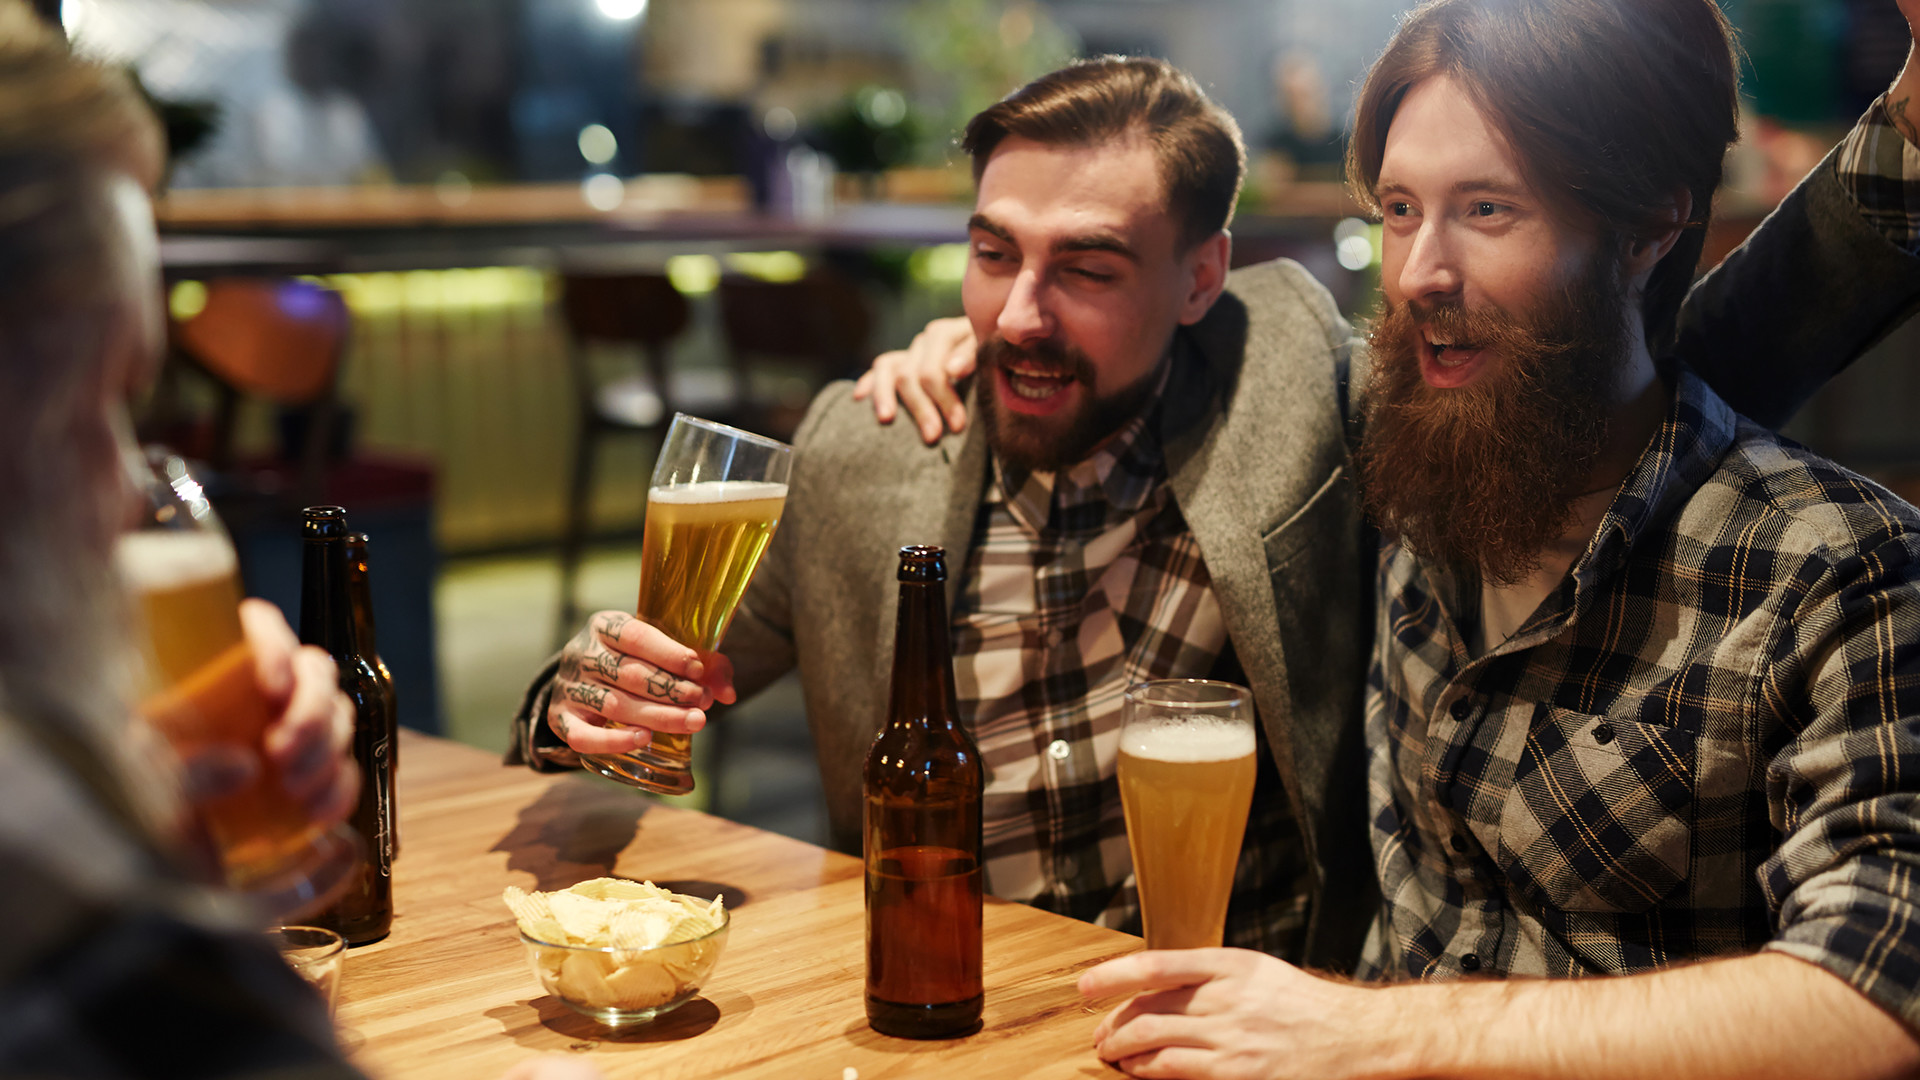 Meet the “Drinking Buddies” – people who make money by drinking with you and listening to your stories